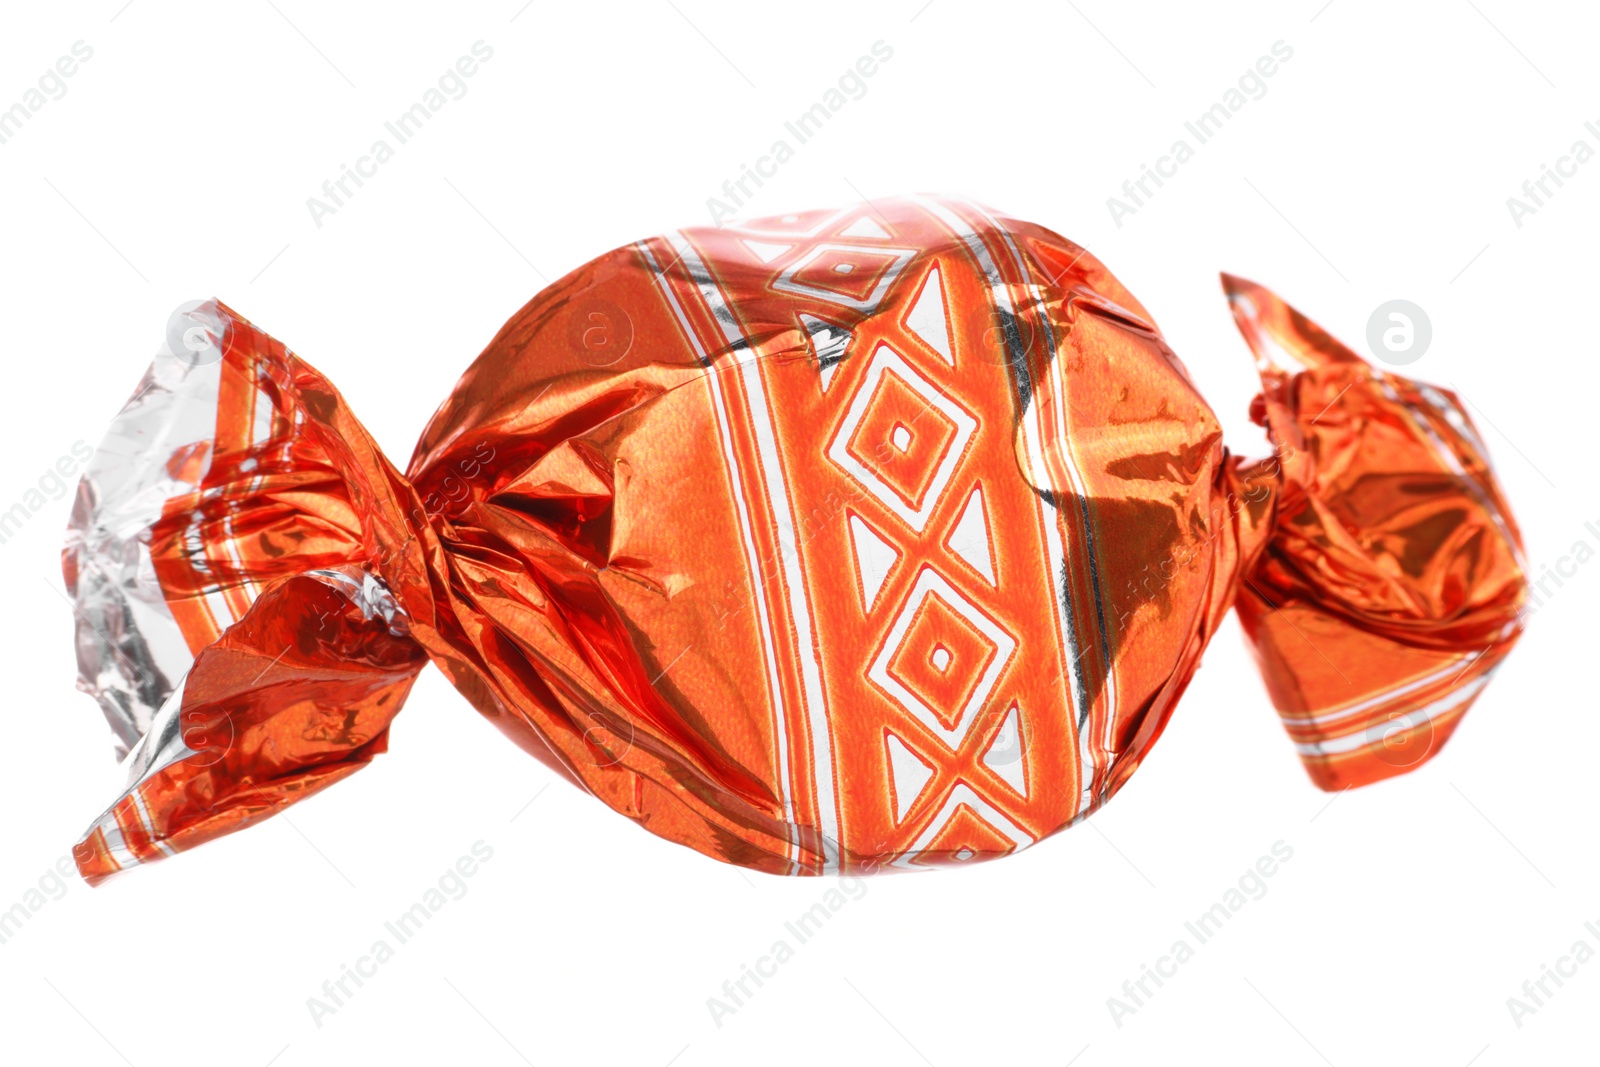 Photo of Candy in orange wrapper isolated on white